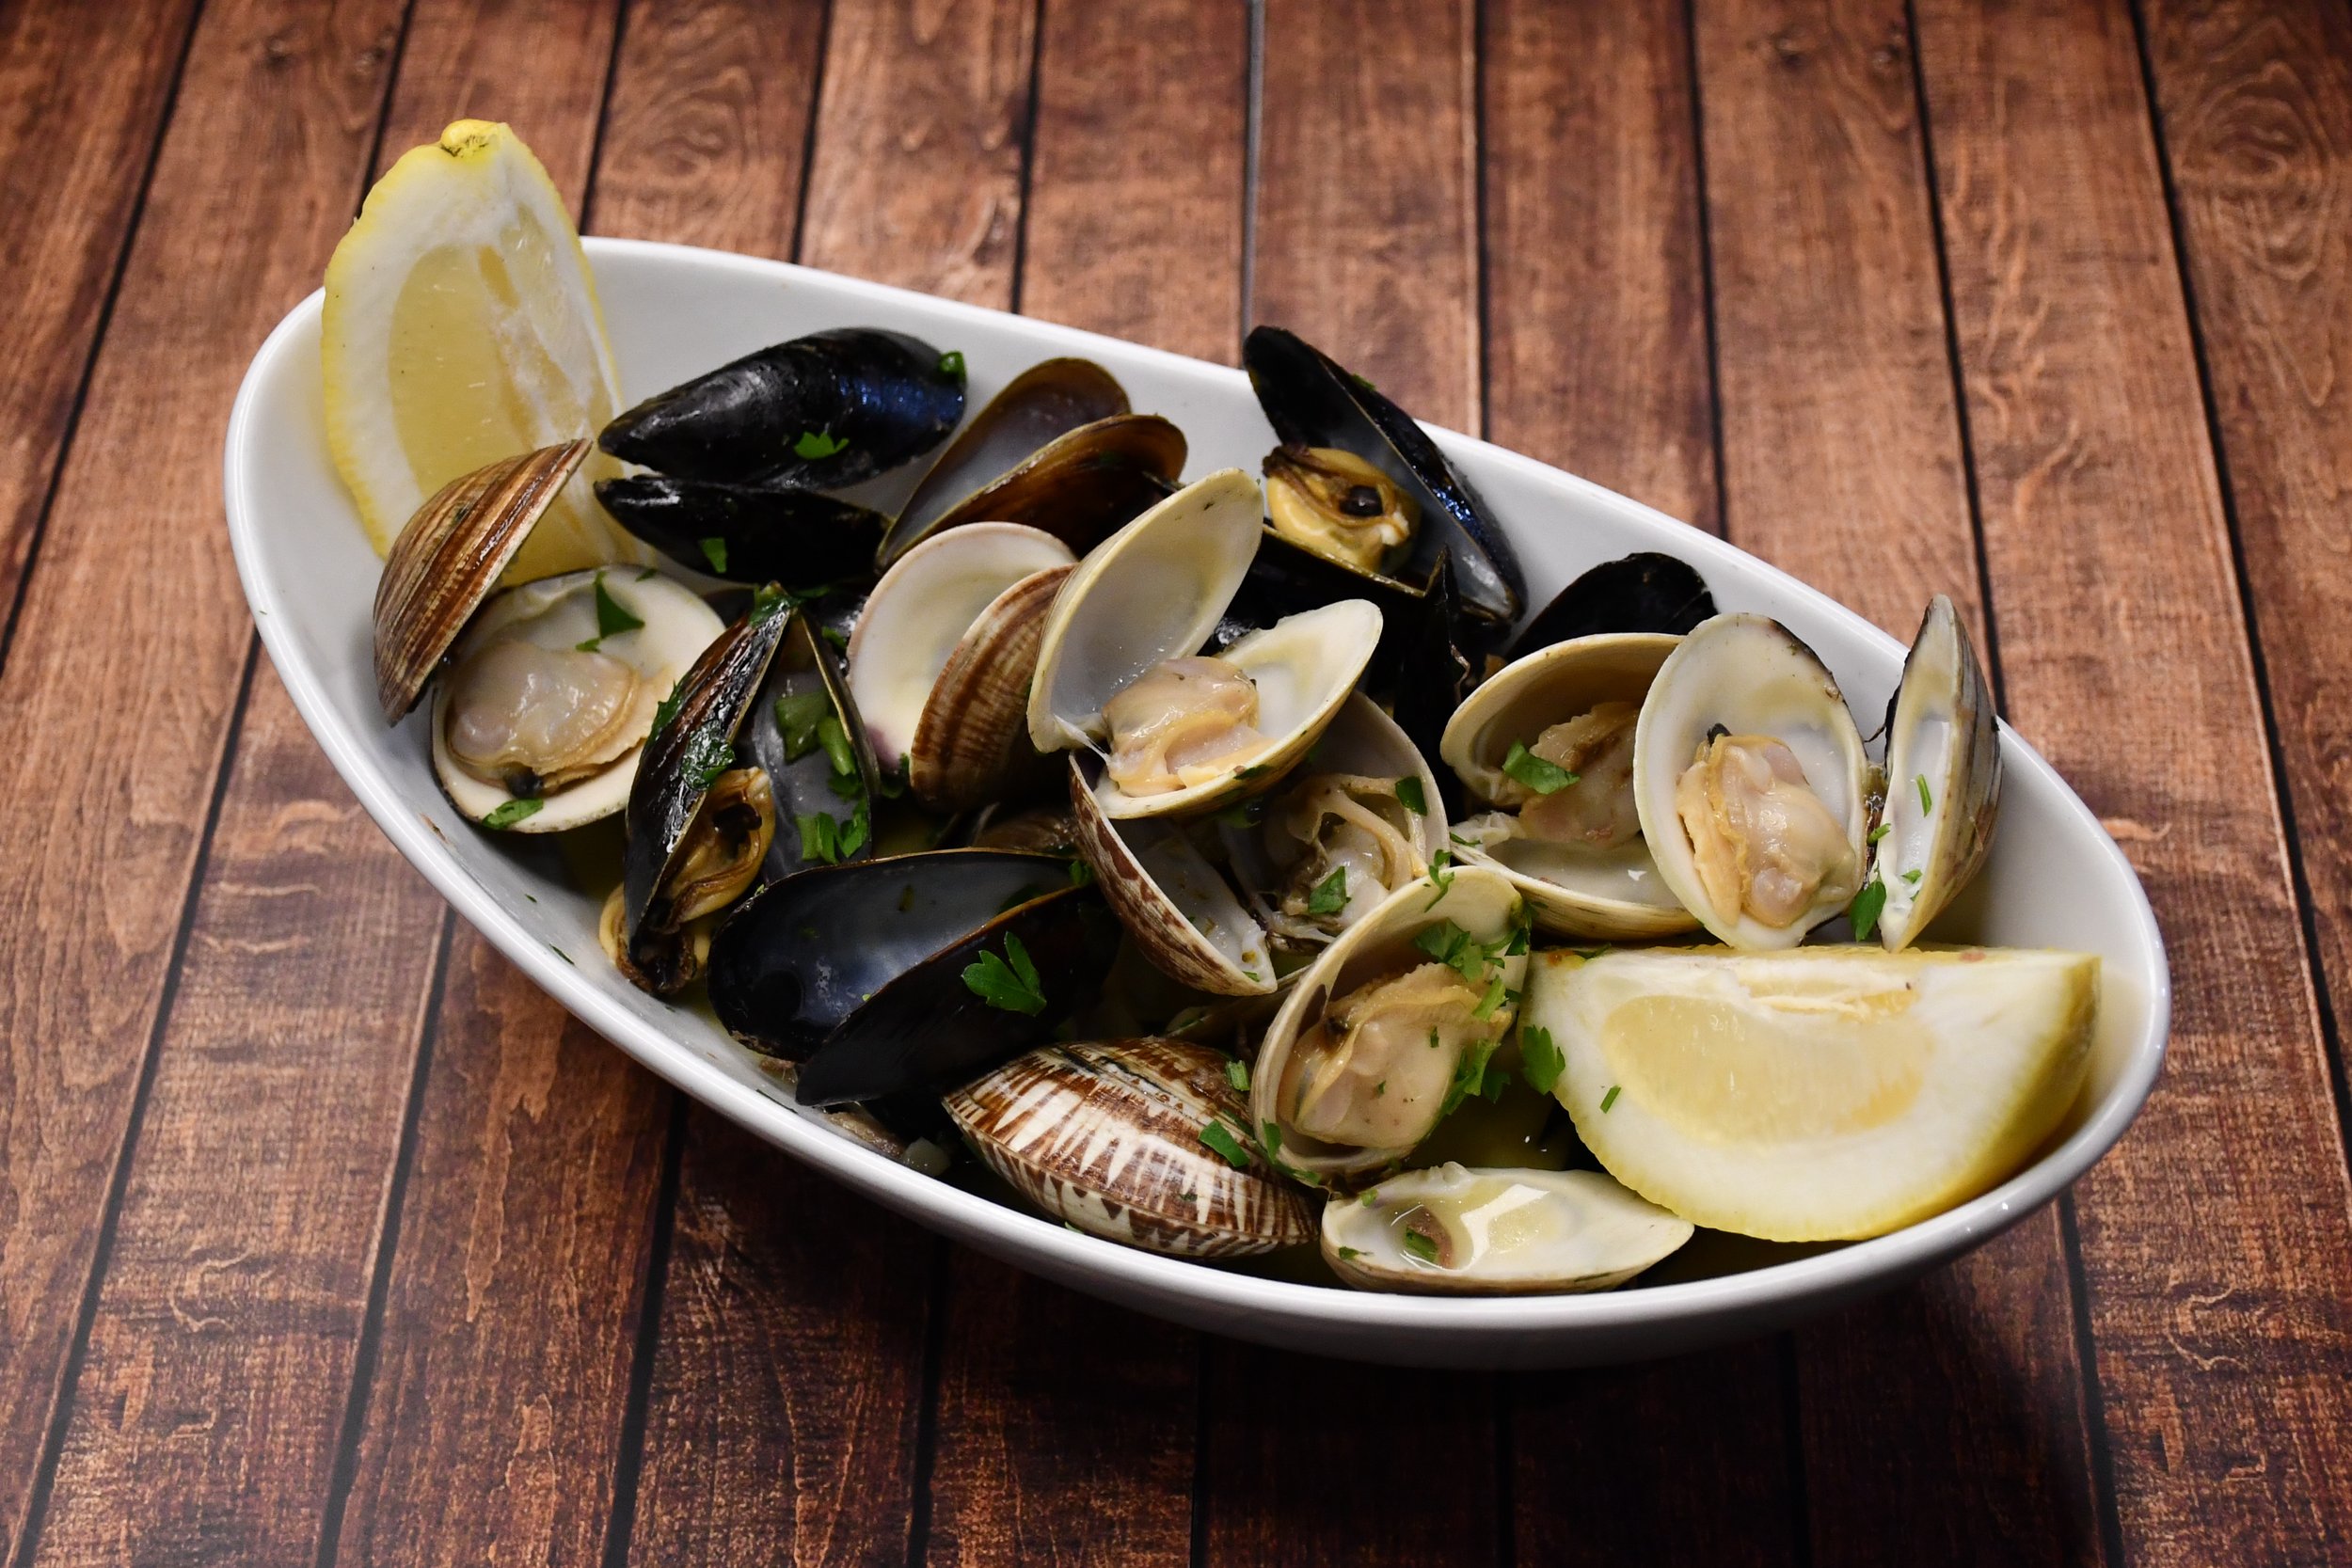 STEAMED CLAMS & MUSSELS